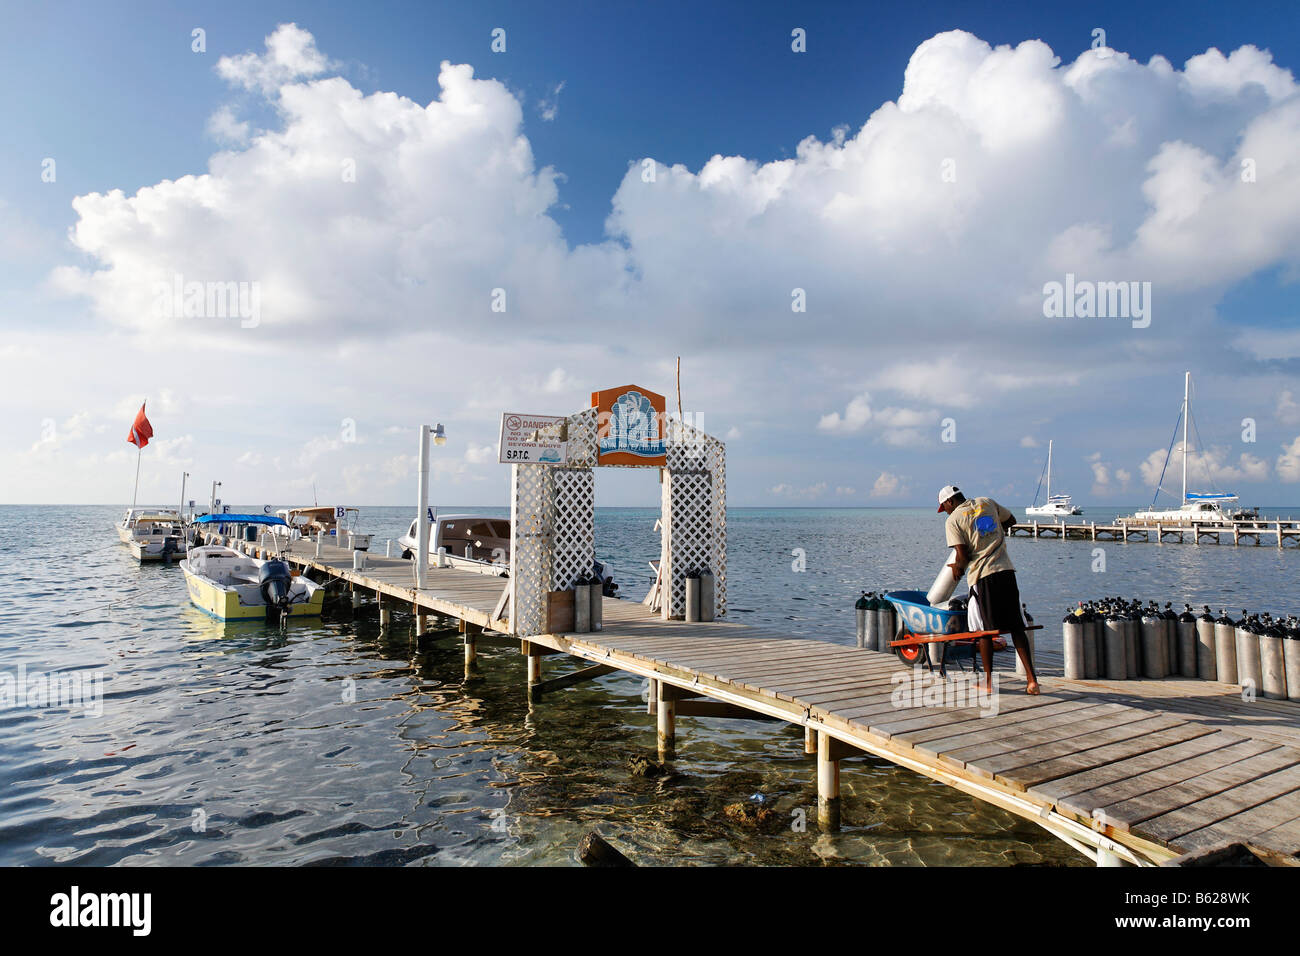 Scuba diving equipment being loaded into a trolley by a man on a pier, San Pedro, Ambergris Cay Island, Belize, Central America Stock Photo